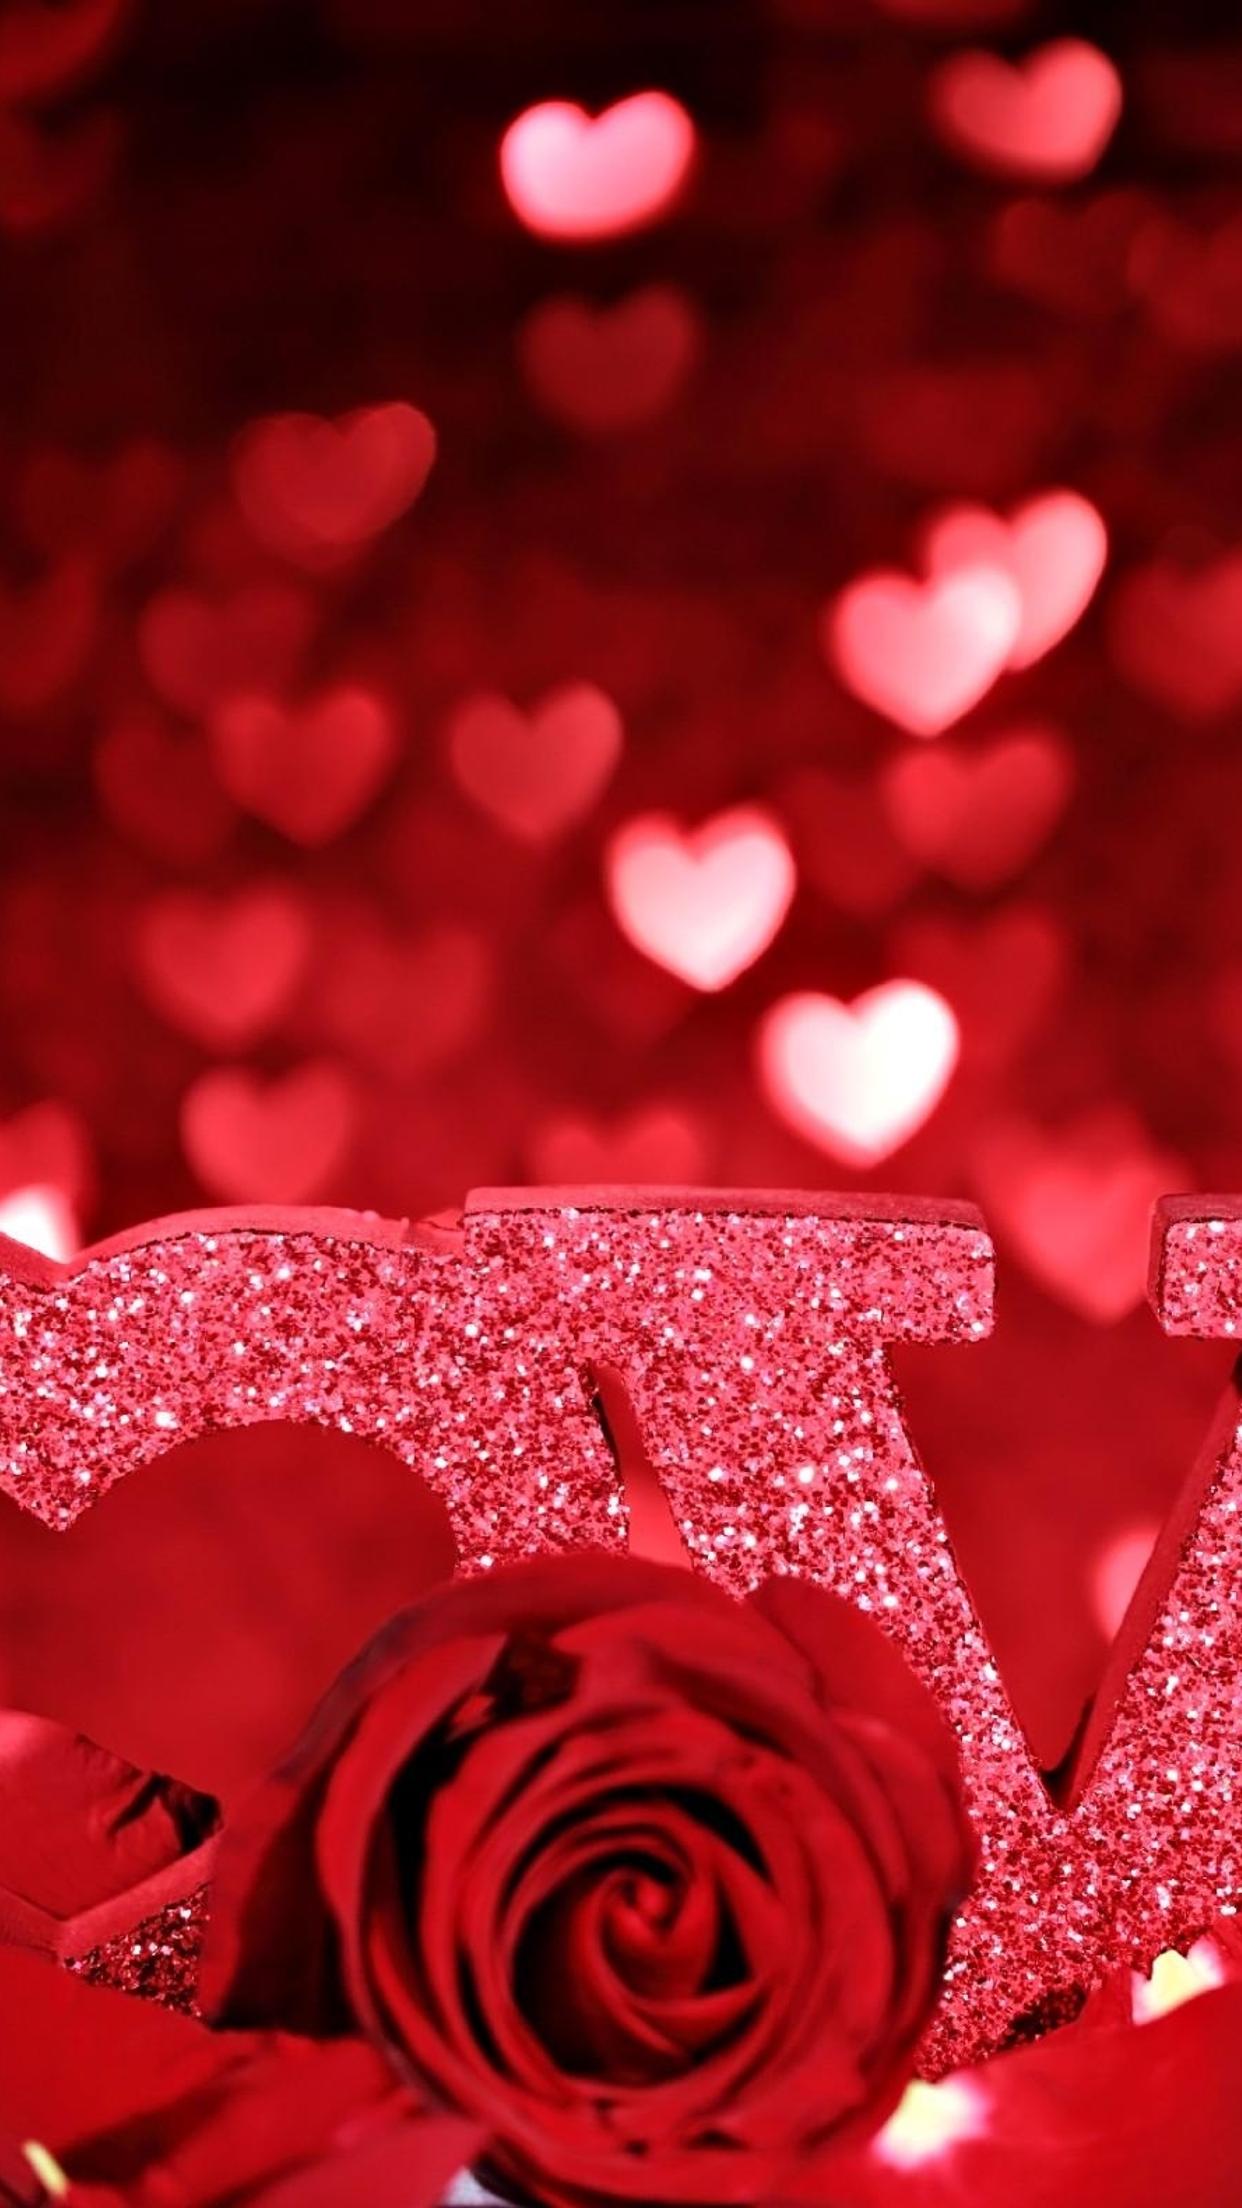 I love you - beautiful red wallpaper - Happy Valentine's Day